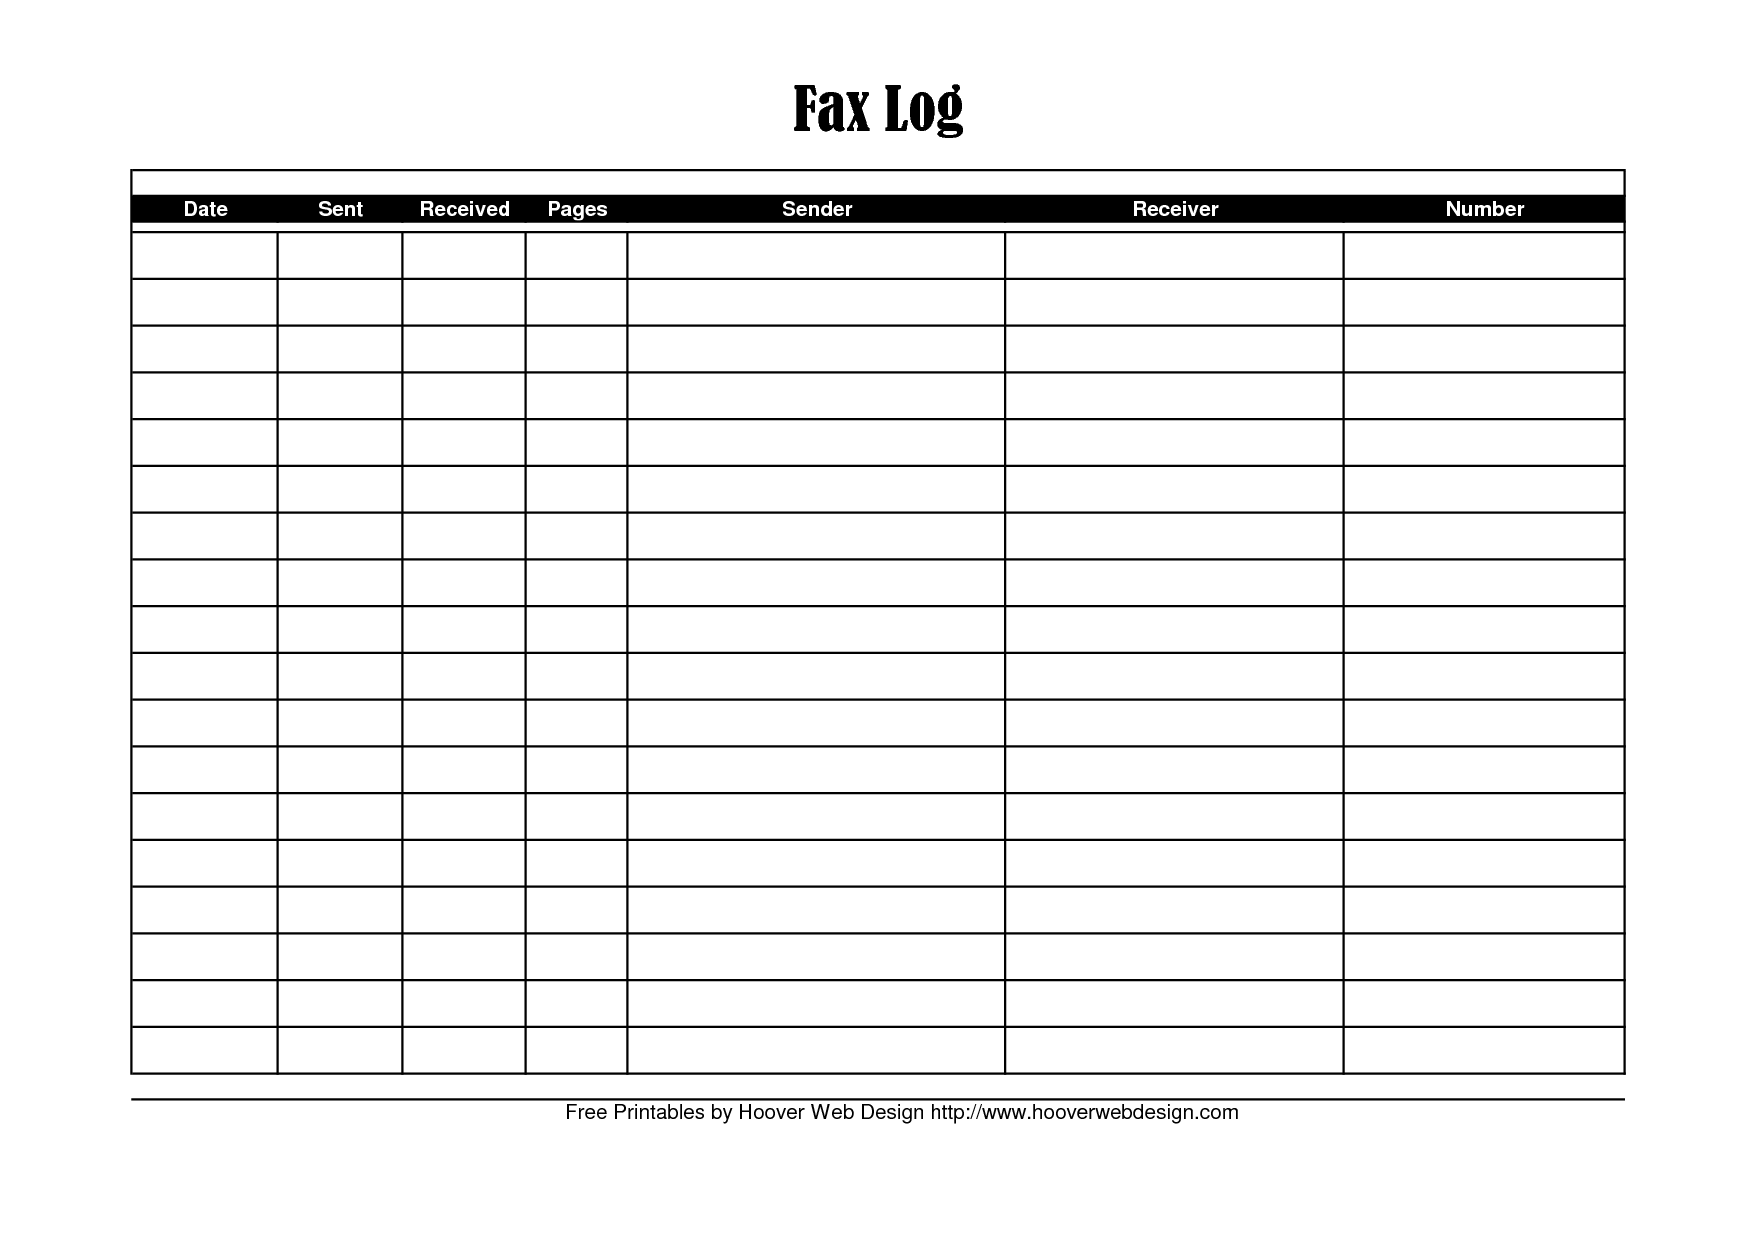 5 Log Sheet Templates   formats, Examples in Word Excel